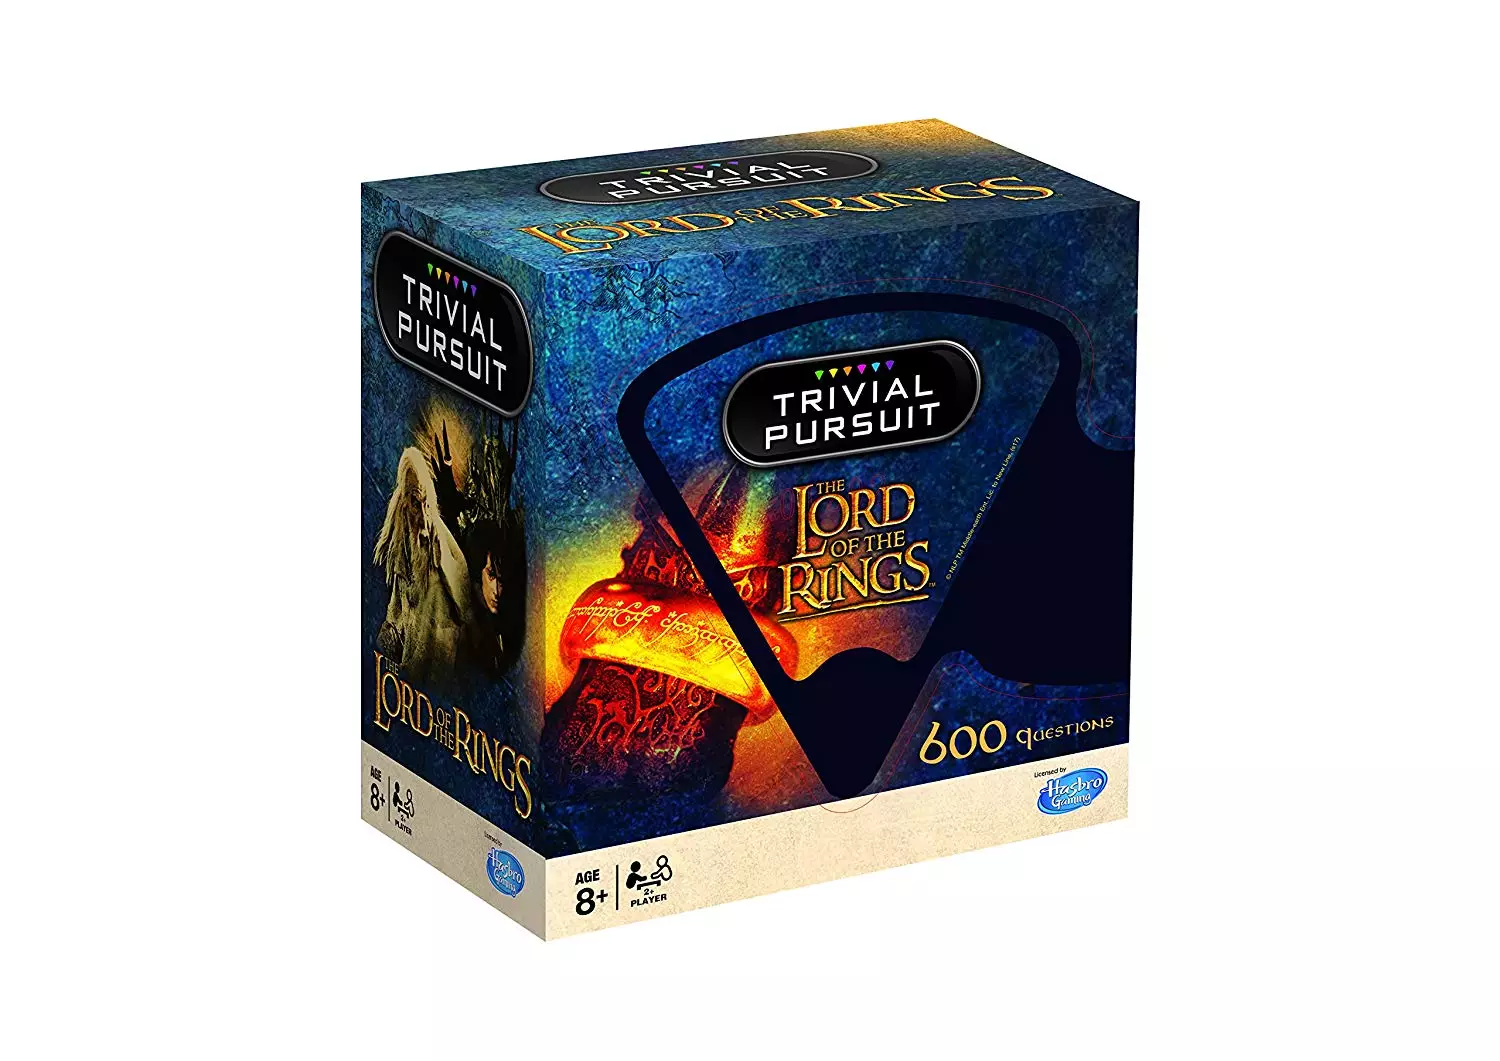 'Lord of the Rings' trivial pursuit is exciting fans this Christmas.